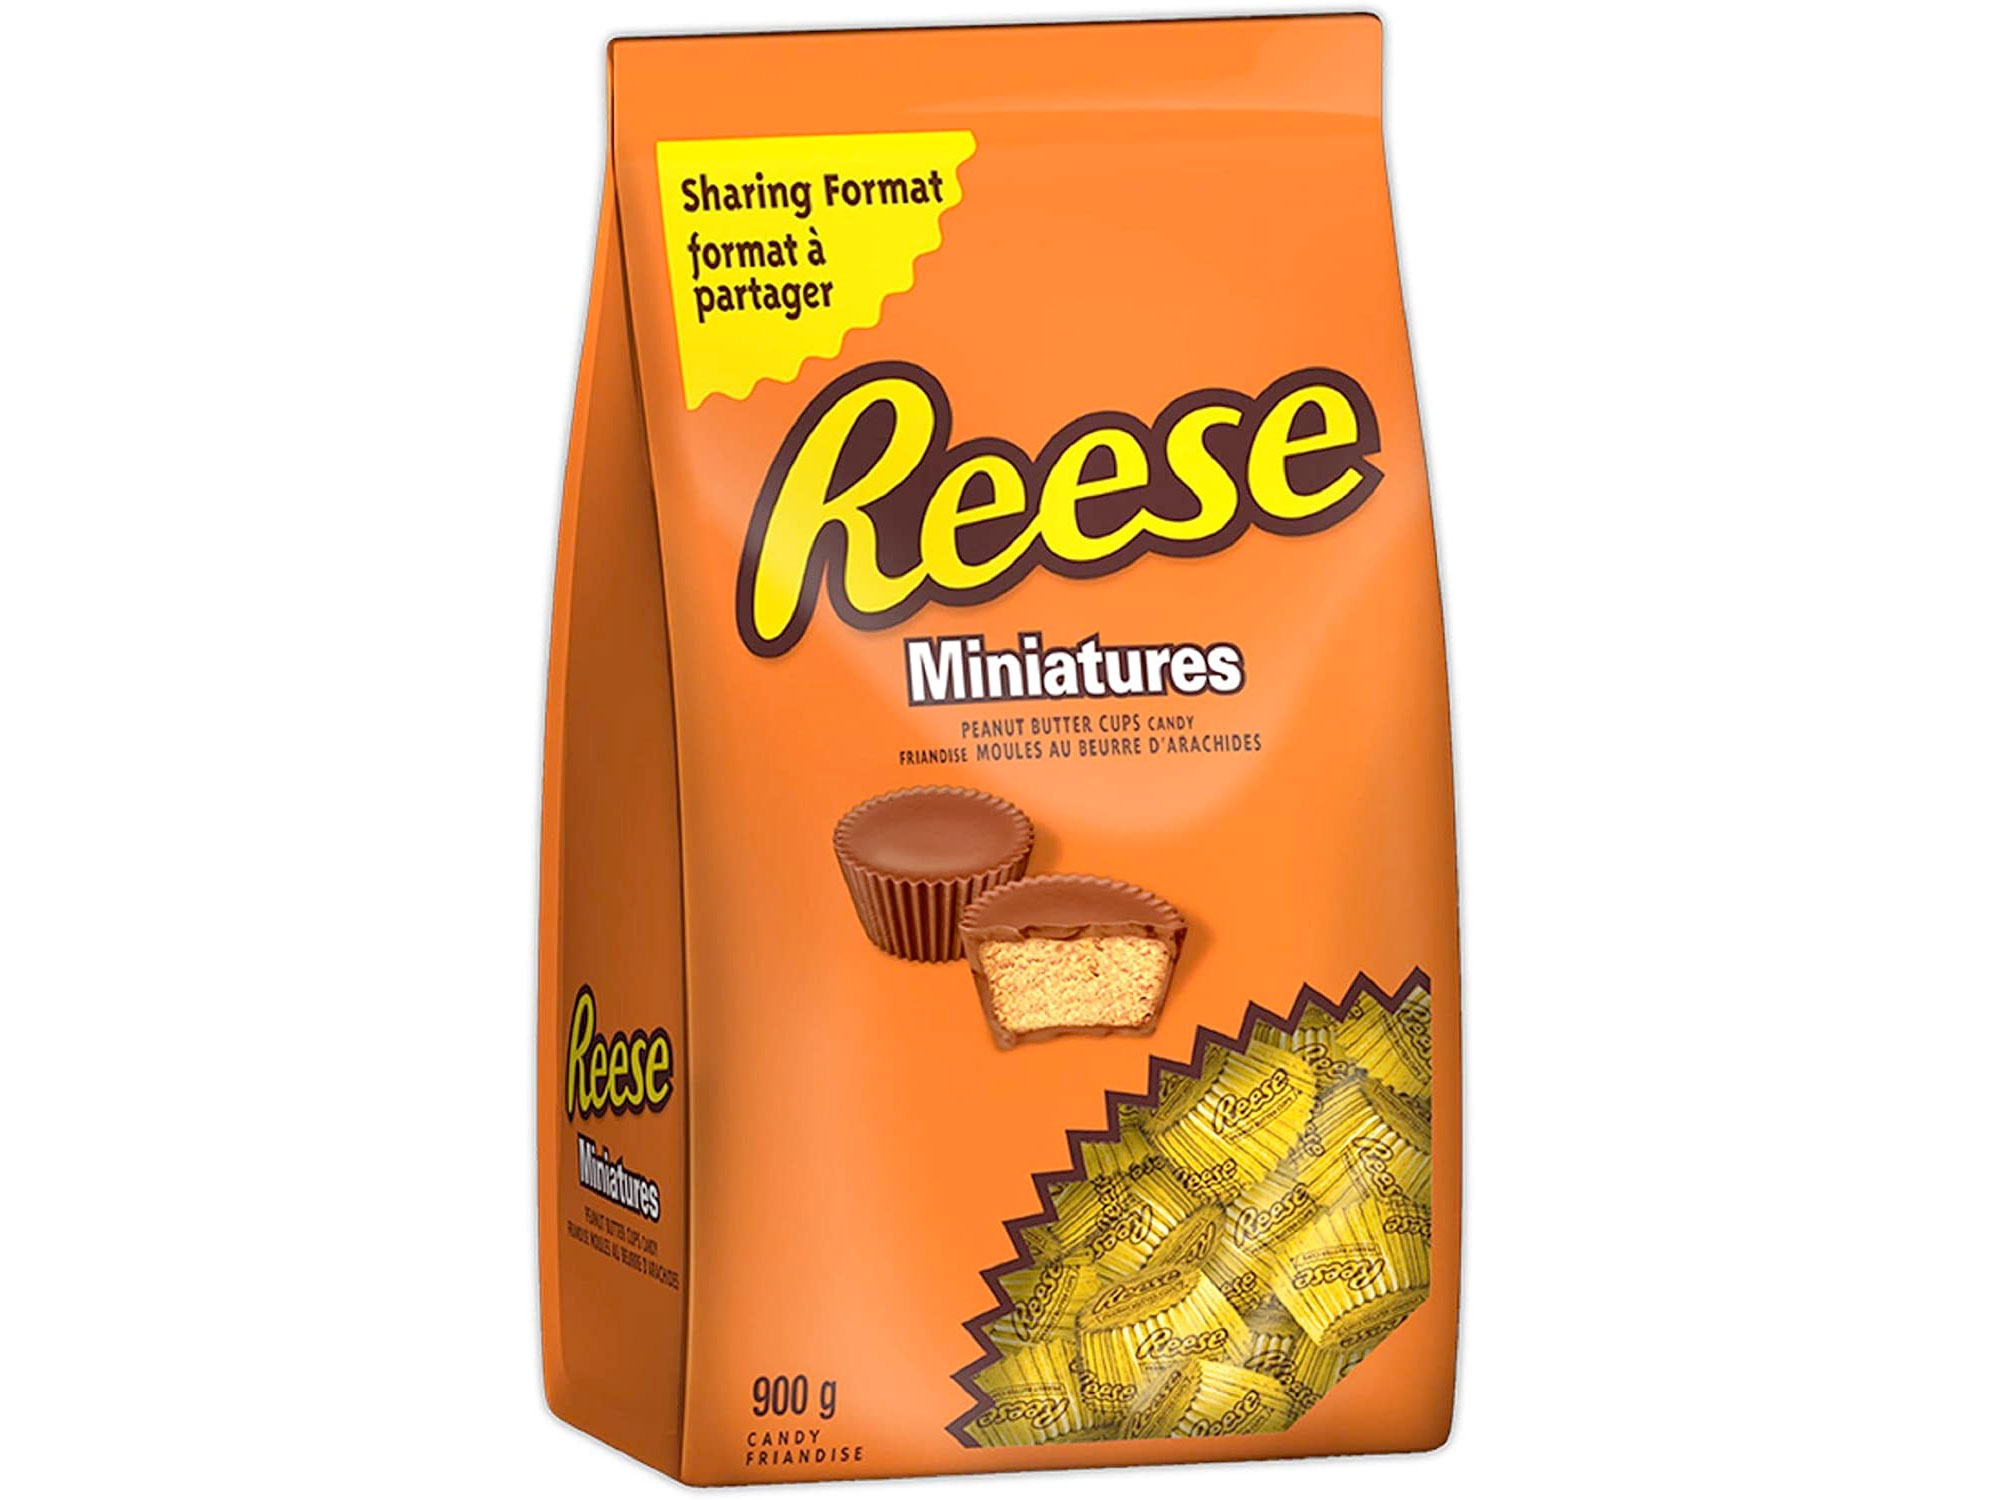 Amazon：Reese Chocolate Candy Peanut Butter Cups(900g)只卖$9.97